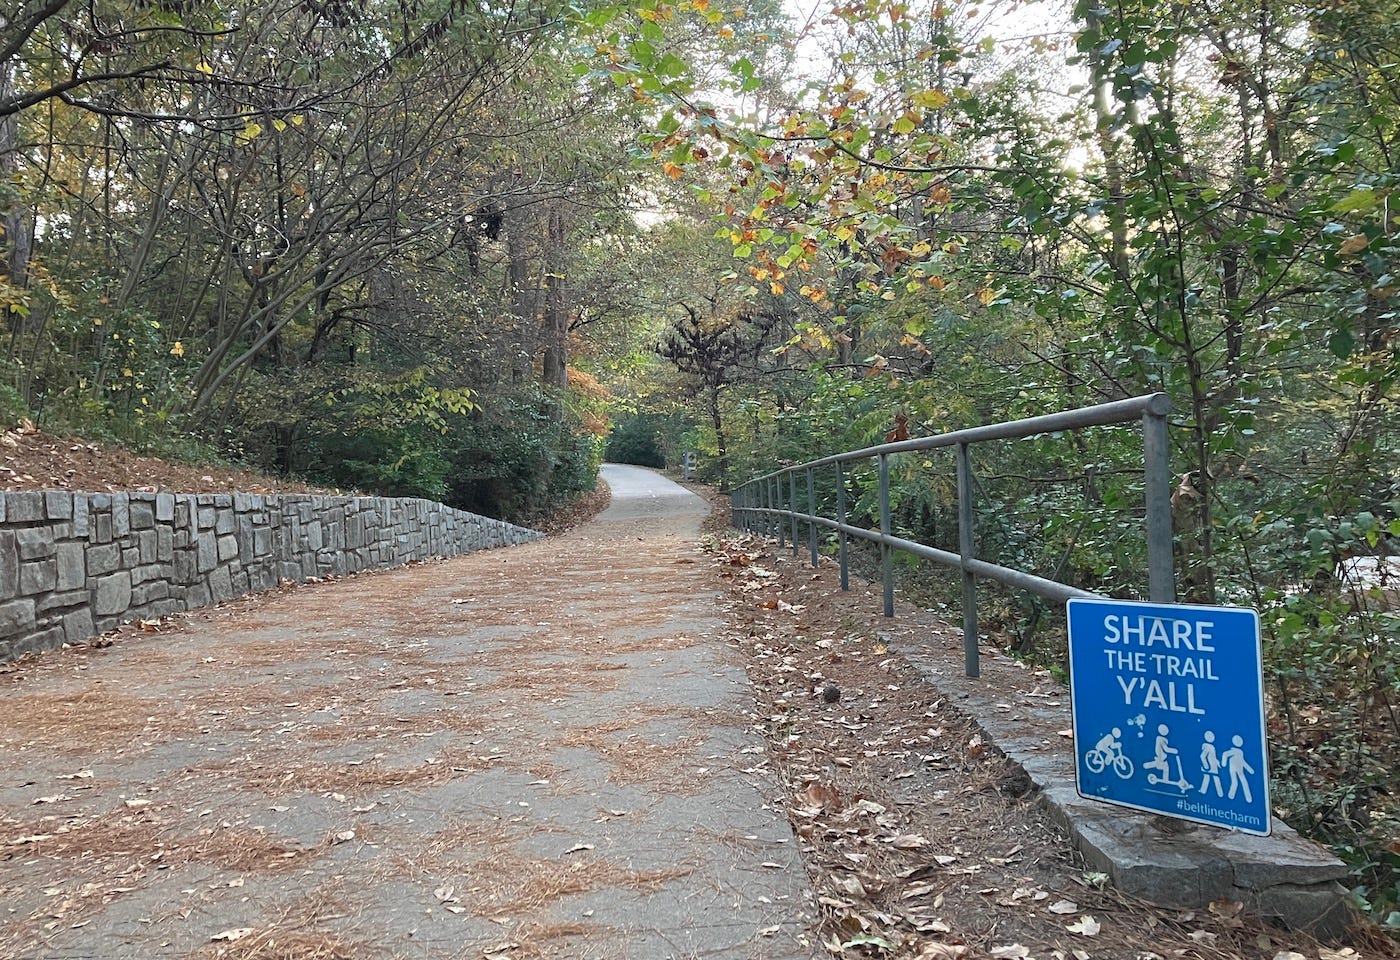 A sign by the trail says "Share the trail y'all" with silhouettes of walkers, a scooter and cyclist